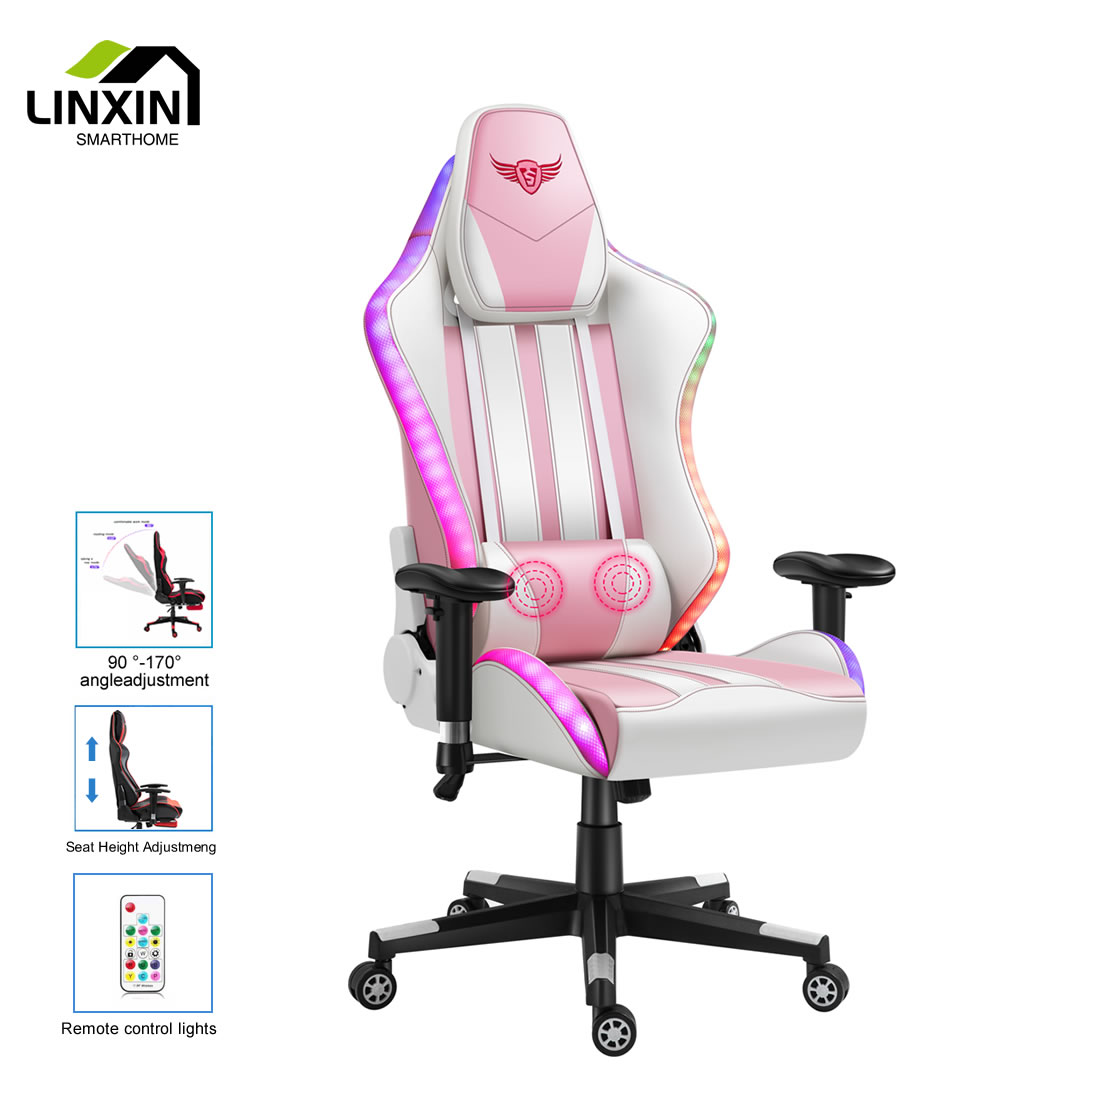 NEW Design LED Light RGB Reclining PC Computer Gamer Player Chaise Black and Blue PU Leather Home Gaming Chair Custom Lo